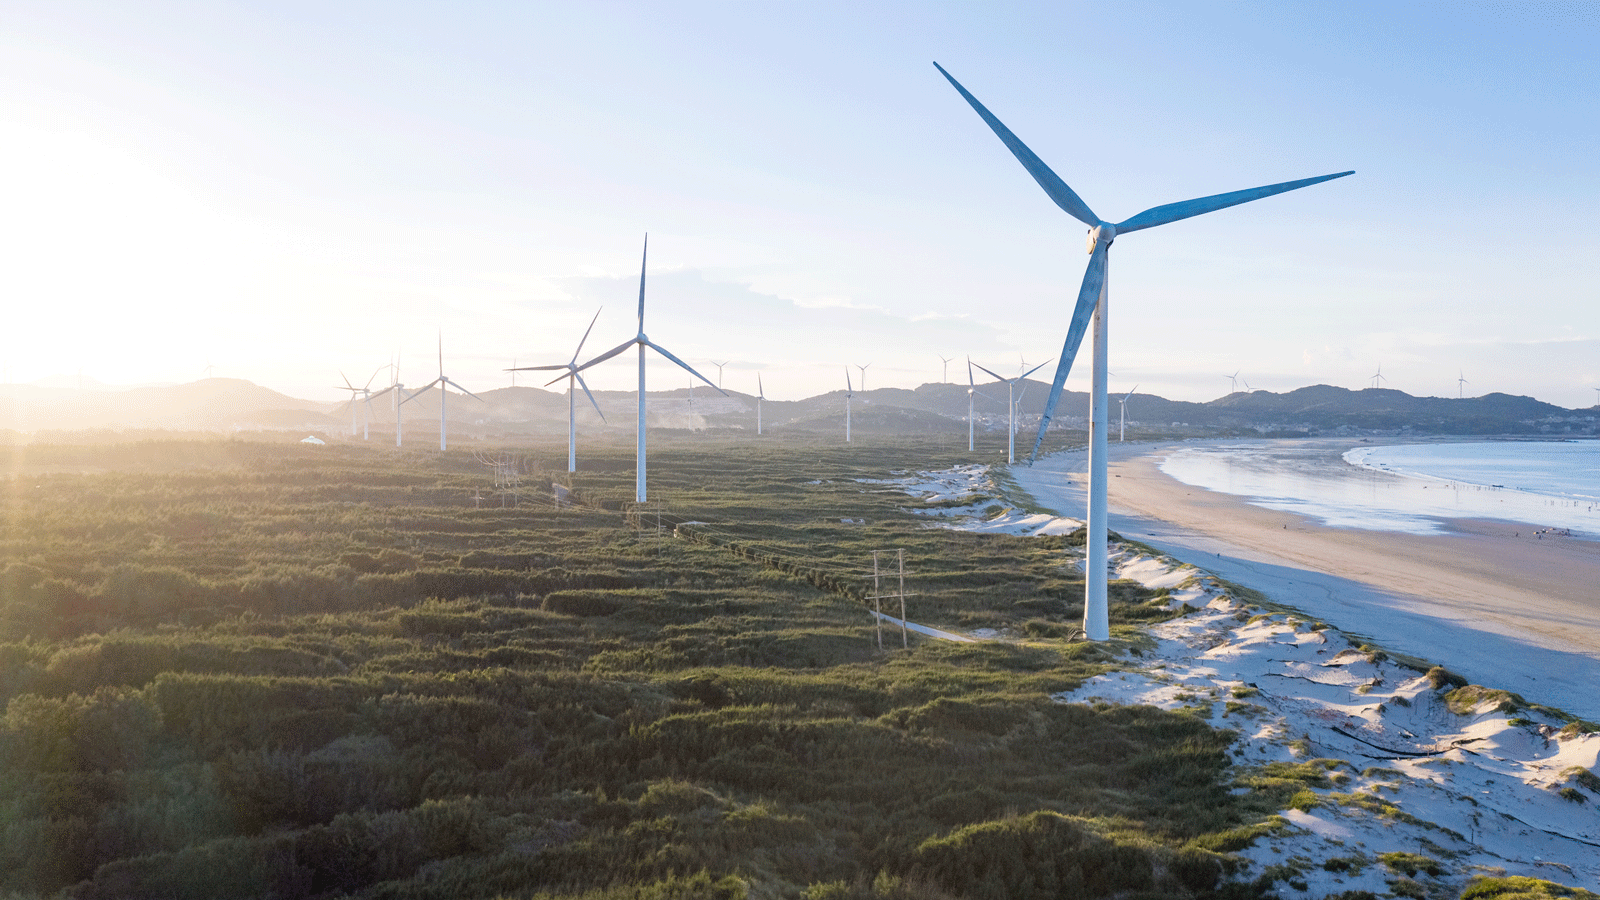 Onshore wind farms offset their carbon emissions within two years, new study finds